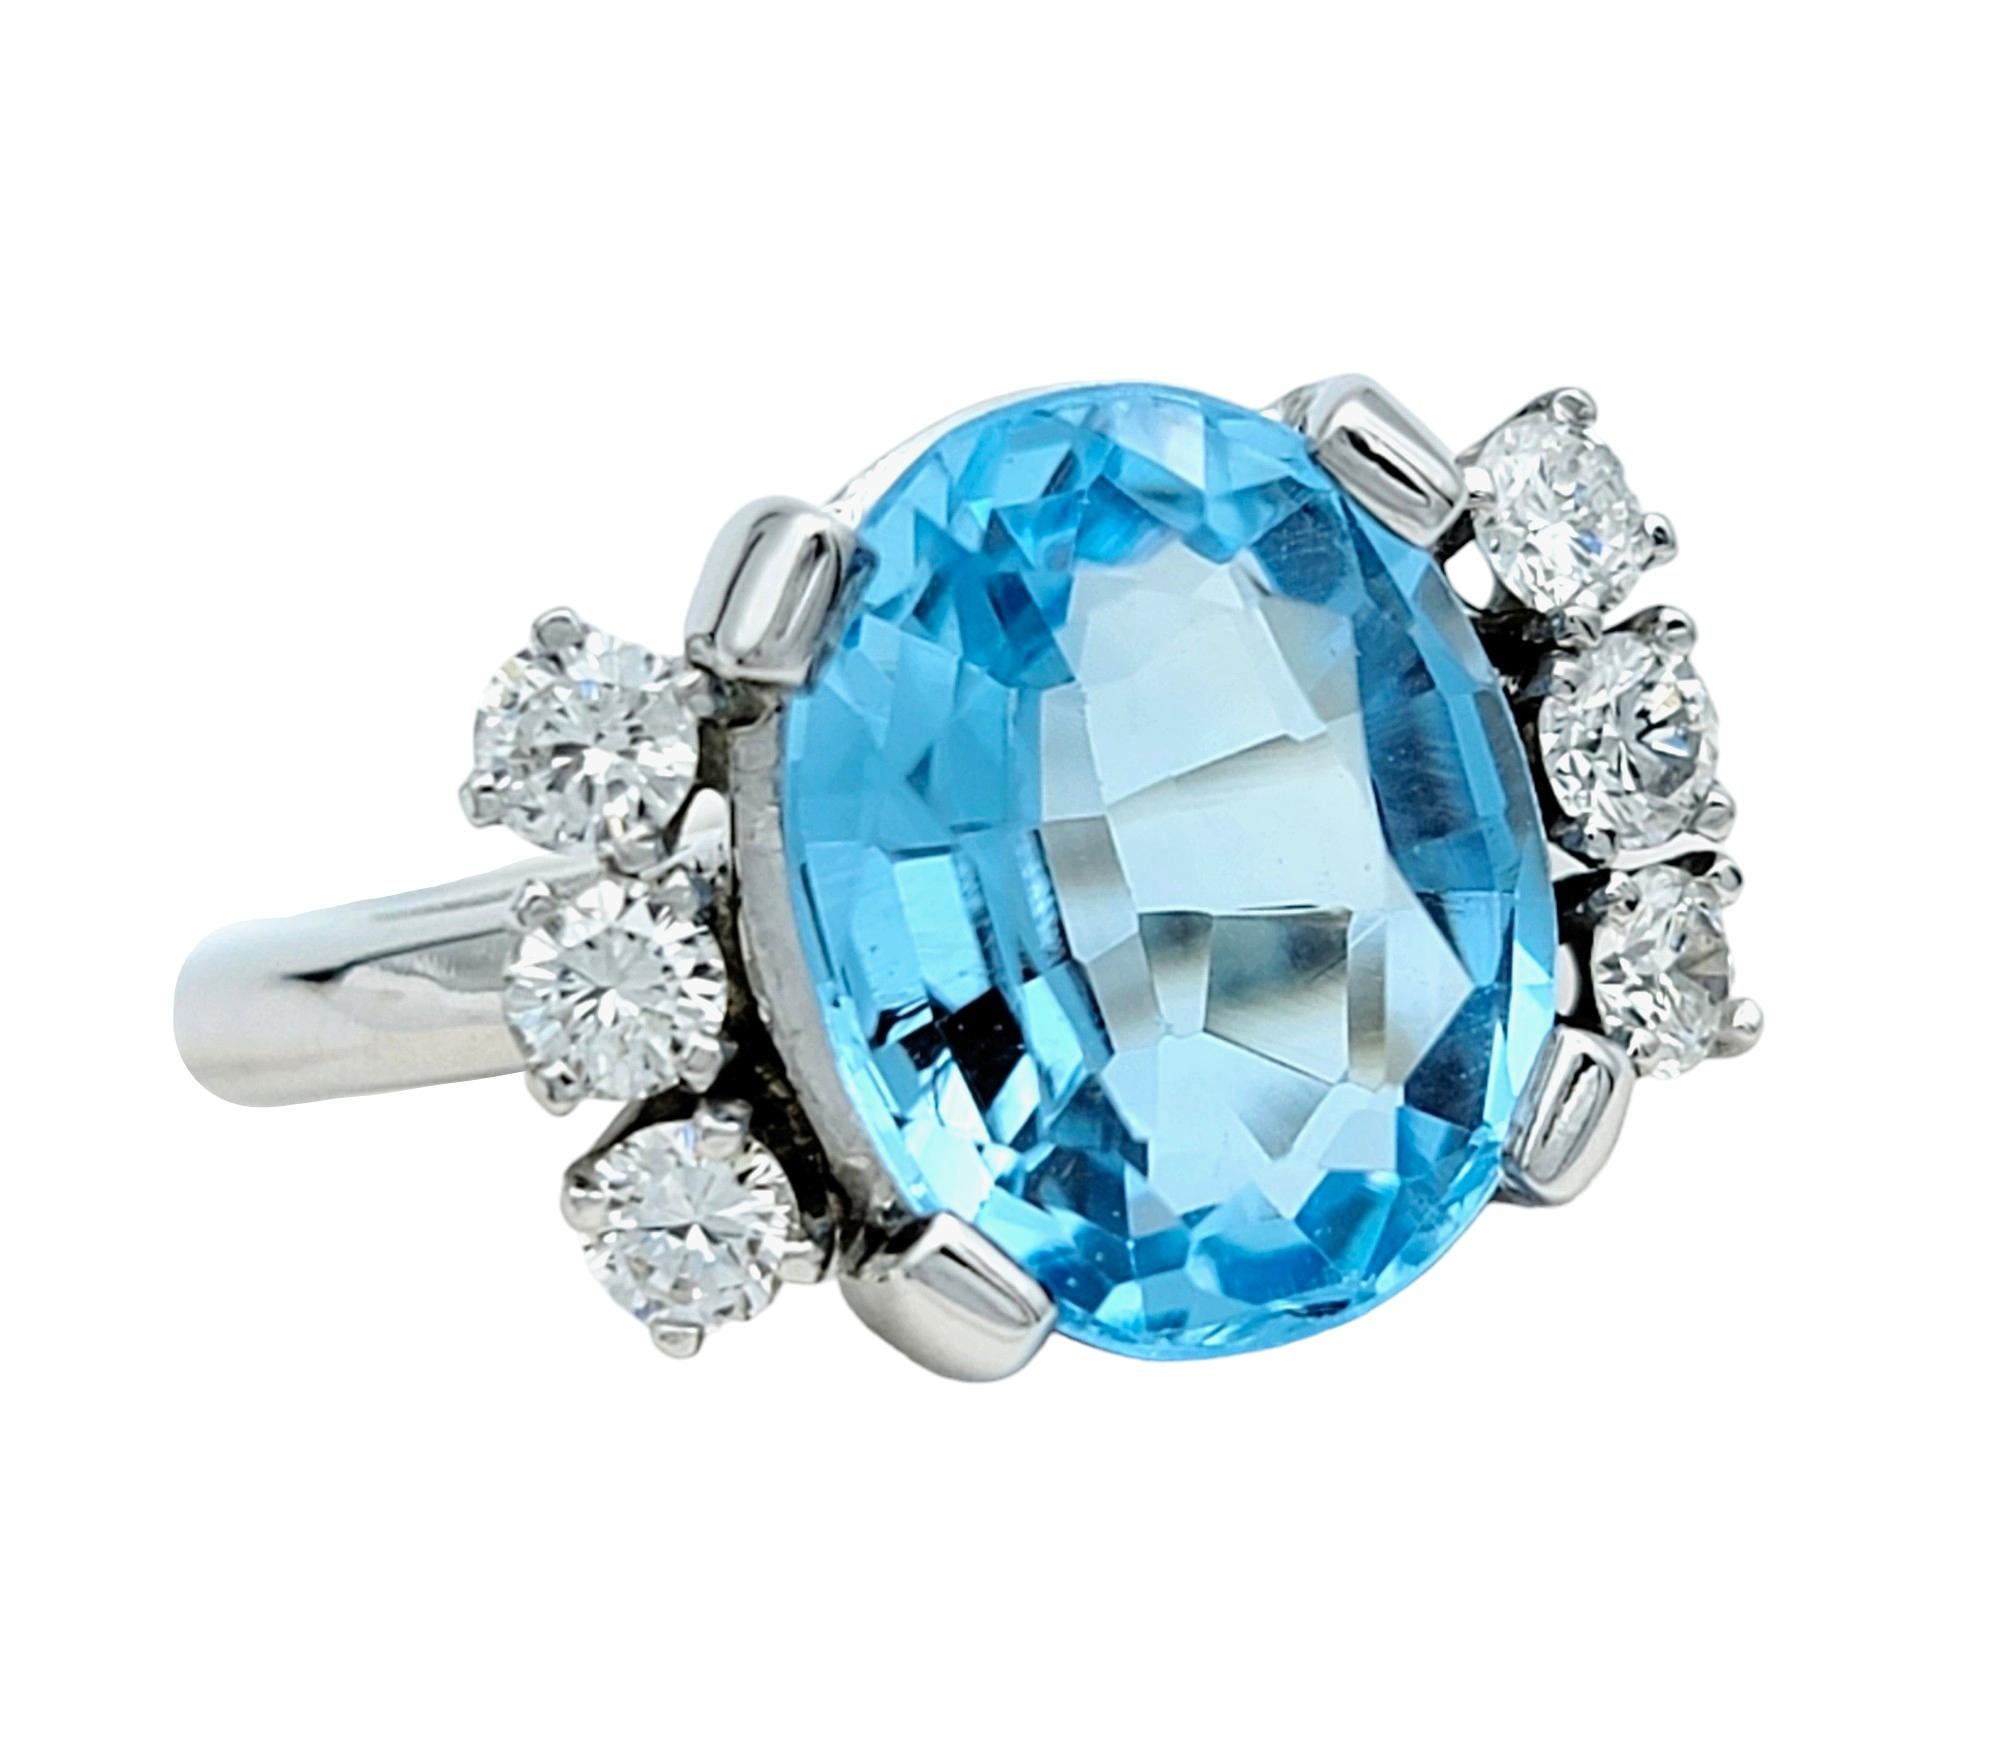 Ring Size: 6.5

This elegant ring features a captivating oval blue topaz as its centerpiece and is set in lustrous 14 karat white gold. Flanking the topaz on each side are 3 shimmering round diamonds, adding a touch of brilliance and sophistication